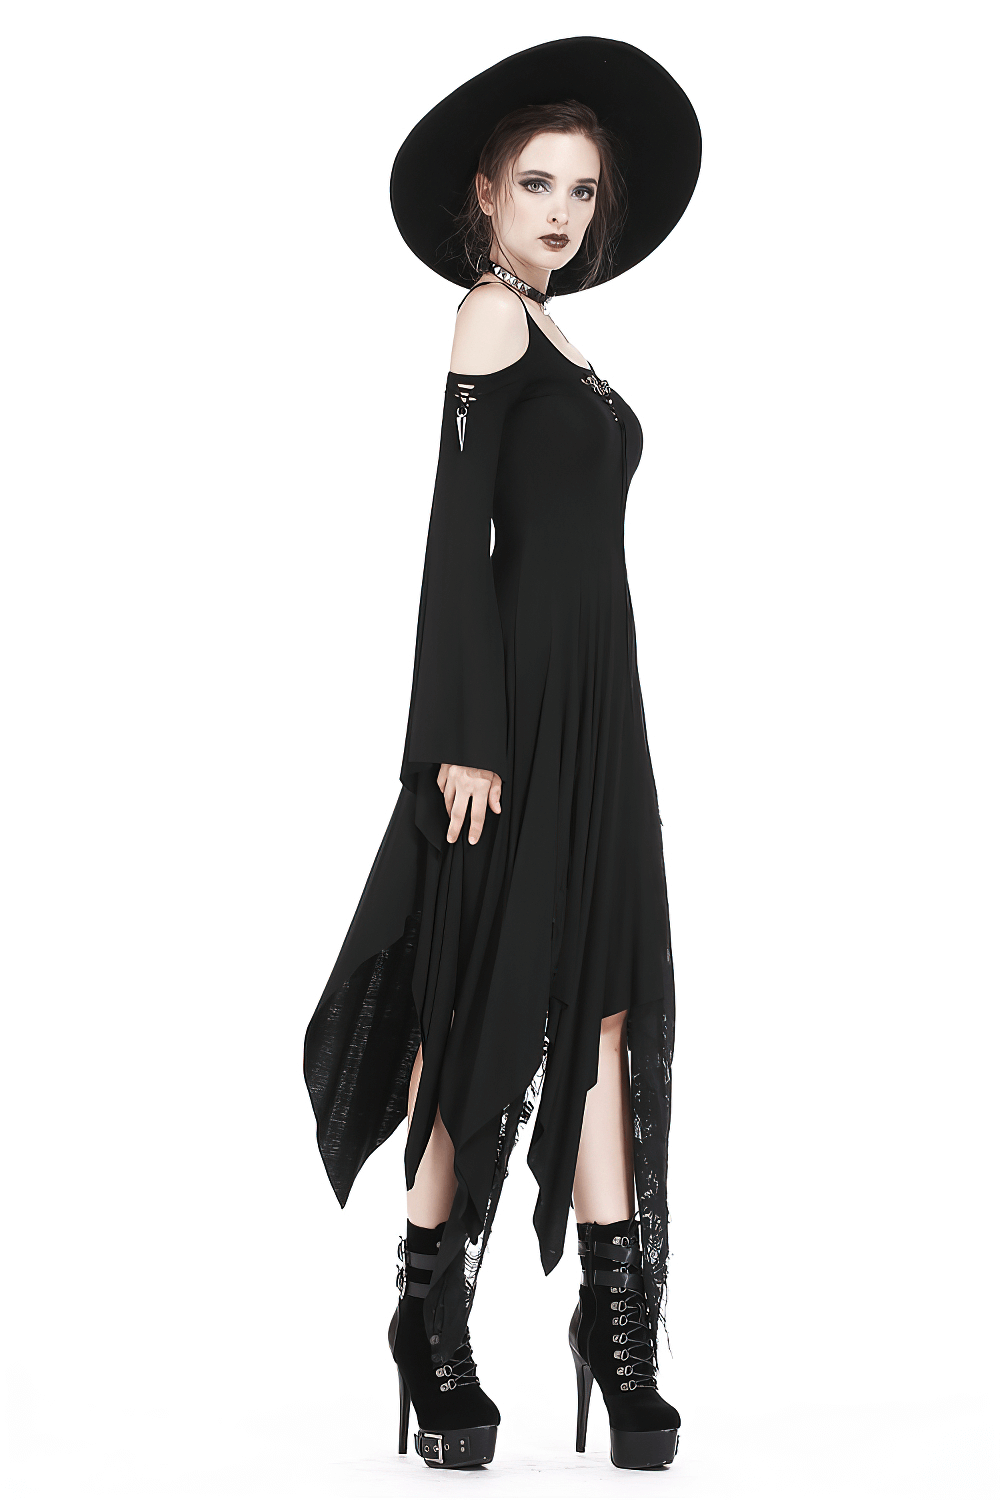 Dark Gothic Crochet Lace Sleeves Long Dress Witchy Style